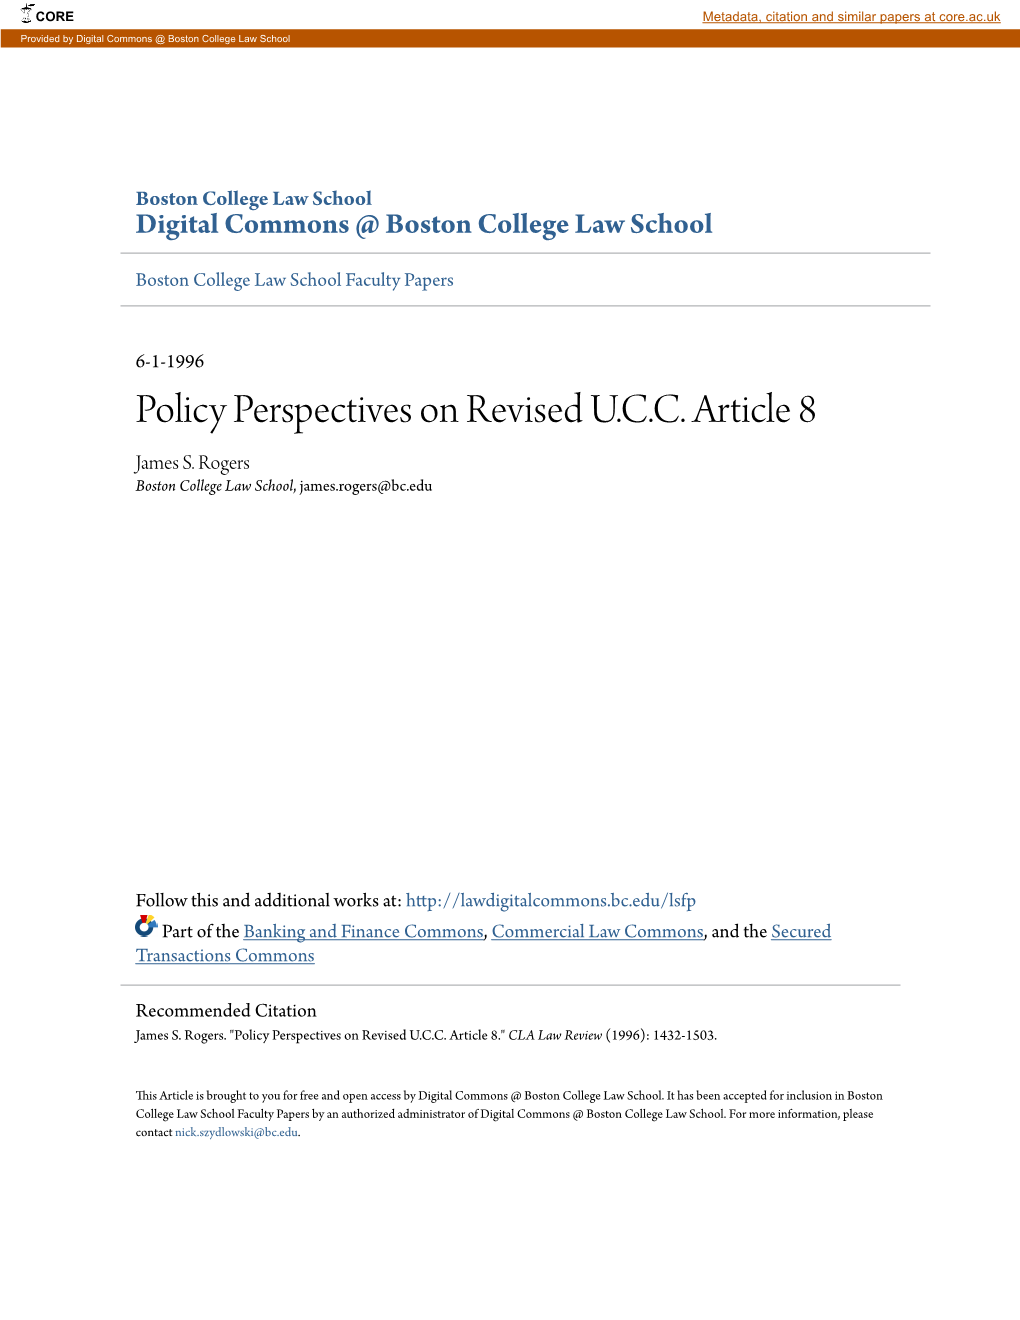 Policy Perspectives on Revised U.C.C. Article 8 James S